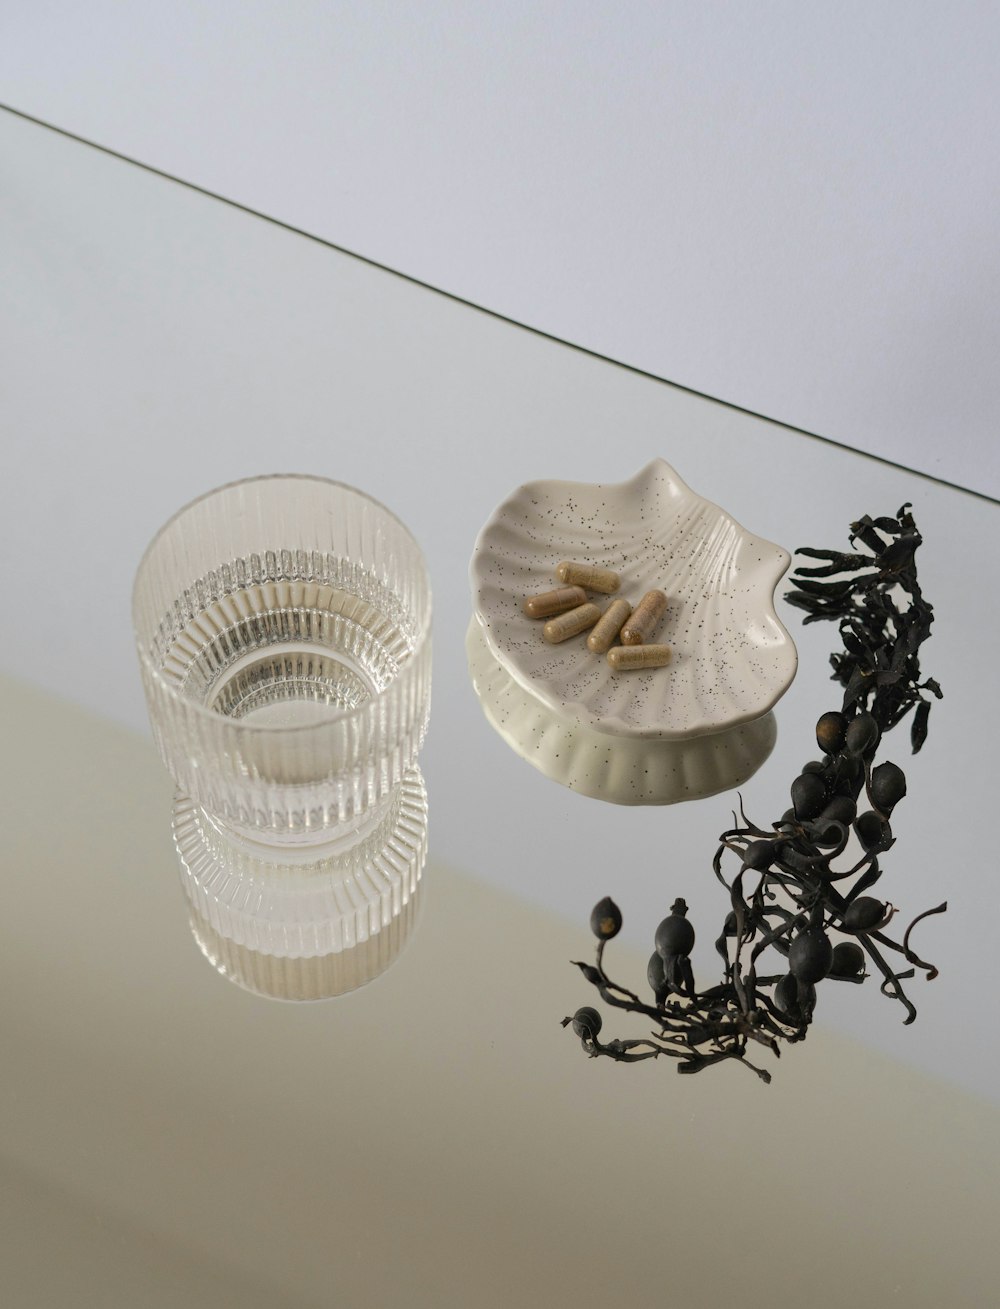 a glass bowl and a plate on a table